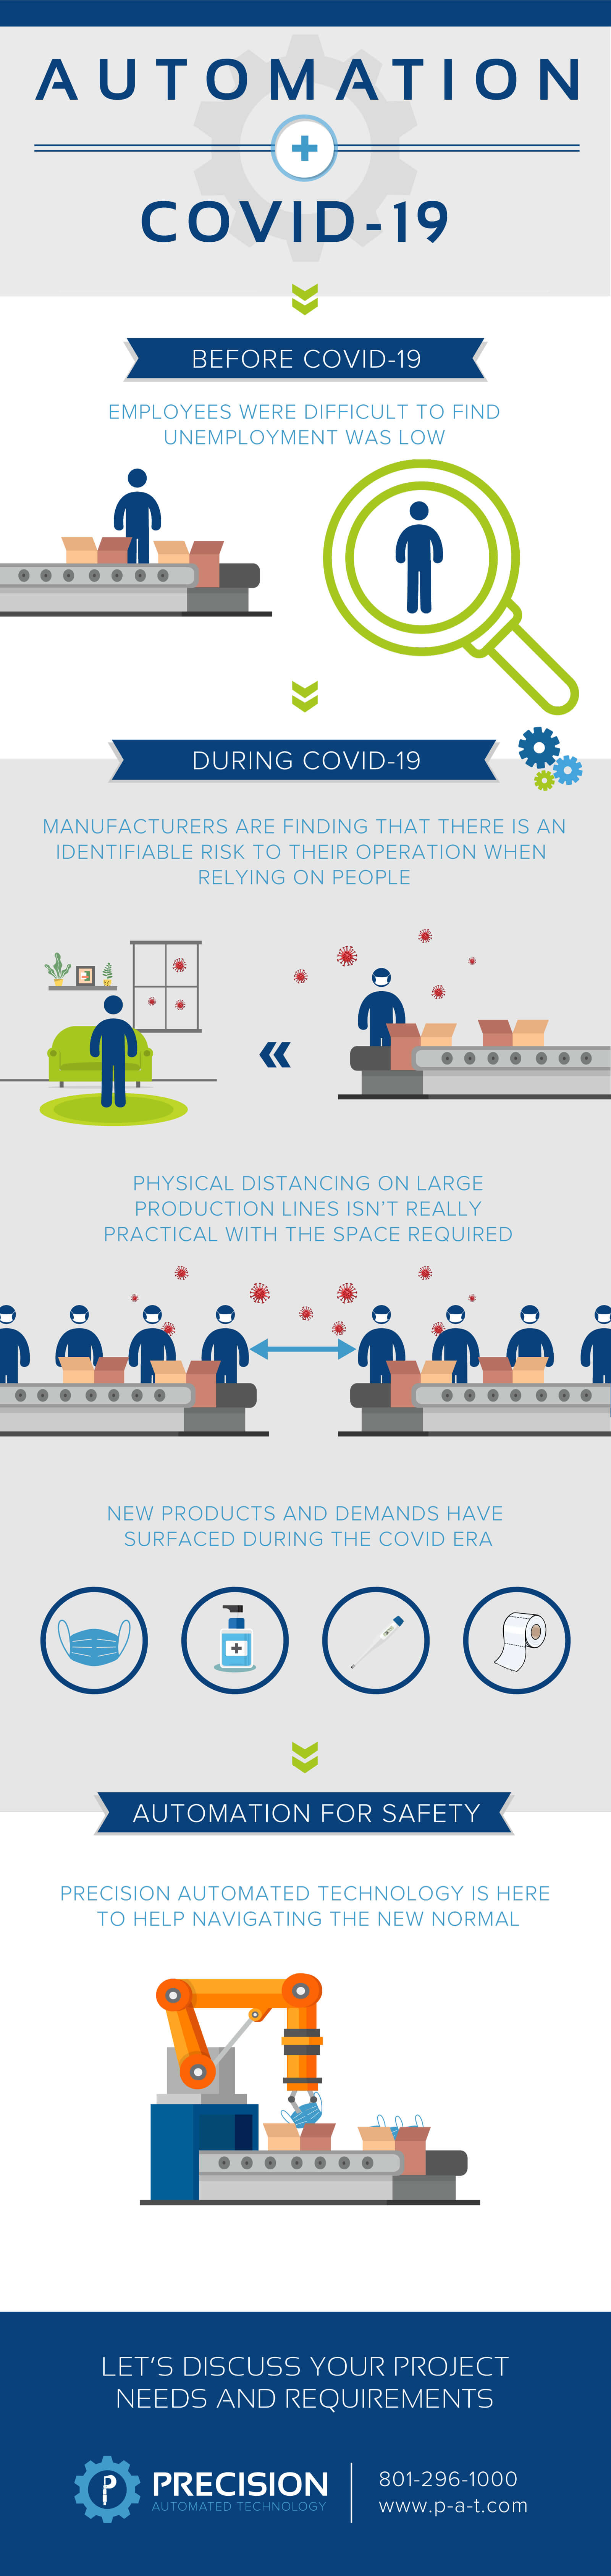 Automation During Covid-19 Infographic